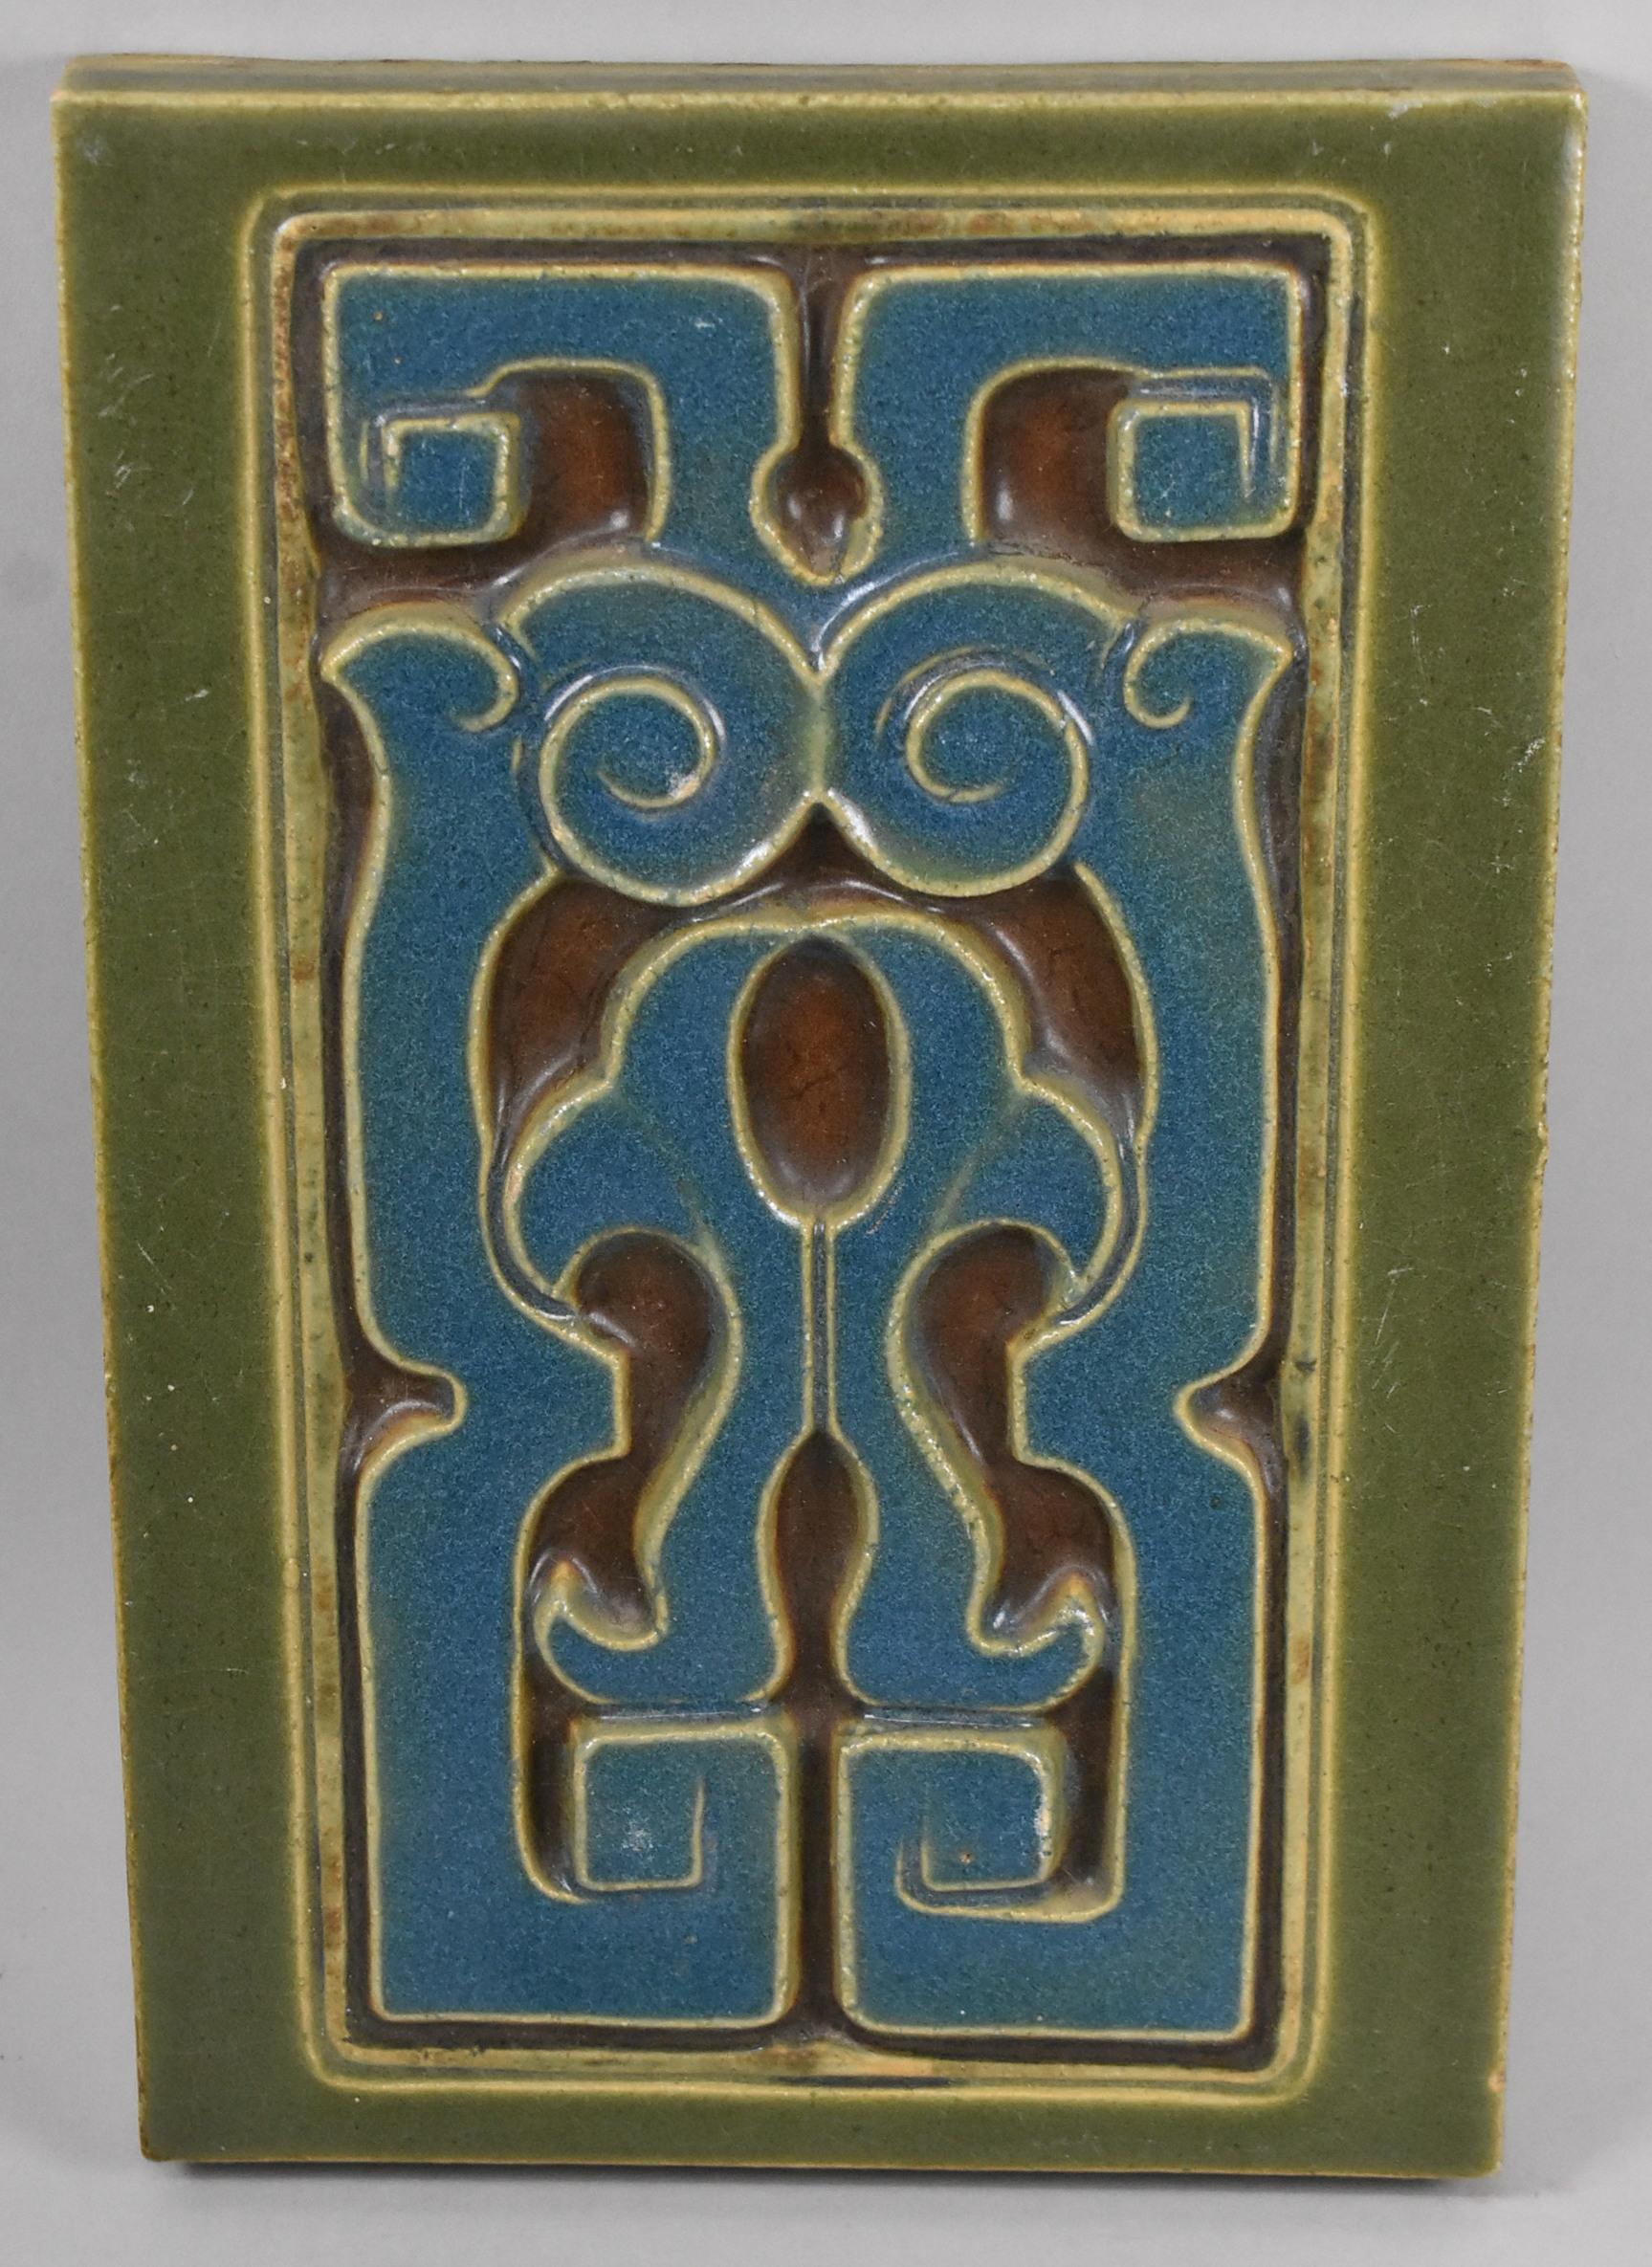 Three Rookwood Pottery Company stylized architectural faience tiles 1987 Y. Minor crazing. One tile has a minute flake on the edge and tiny flakes on some of the raised designs.